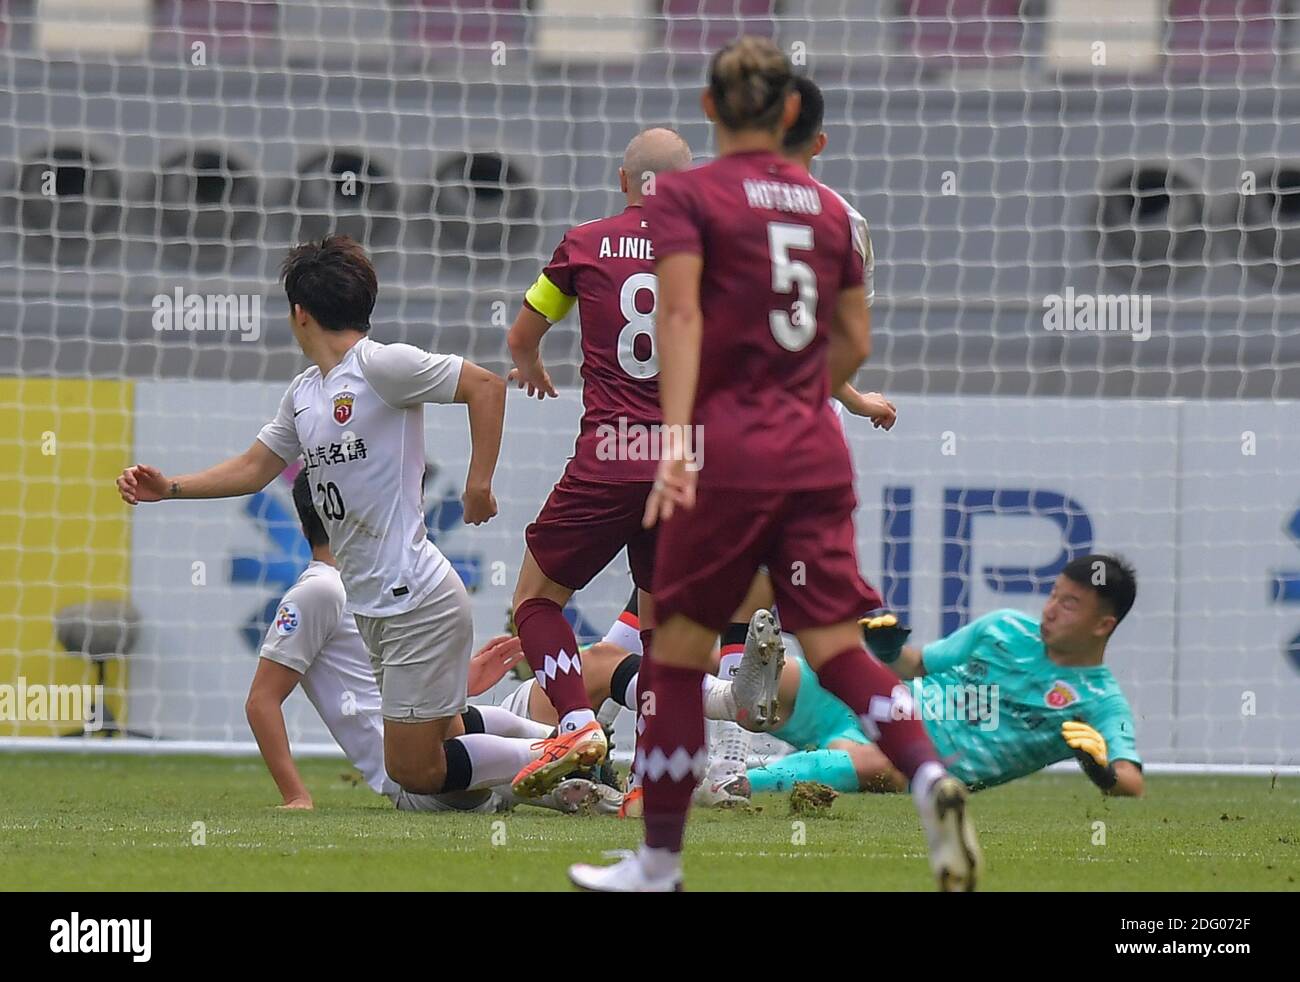 Doha, Qatar. 7th Dec, 2020. Andres Iniesta of Vissel Kobe scores his goal during the round of 16 match of the AFC Champions League between Shanghai SIPG FC of China and Vissel Kobe of Japan in Doha, Qatar, Dec. 7, 2020. Credit: Nikku/Xinhua/Alamy Live News Stock Photo